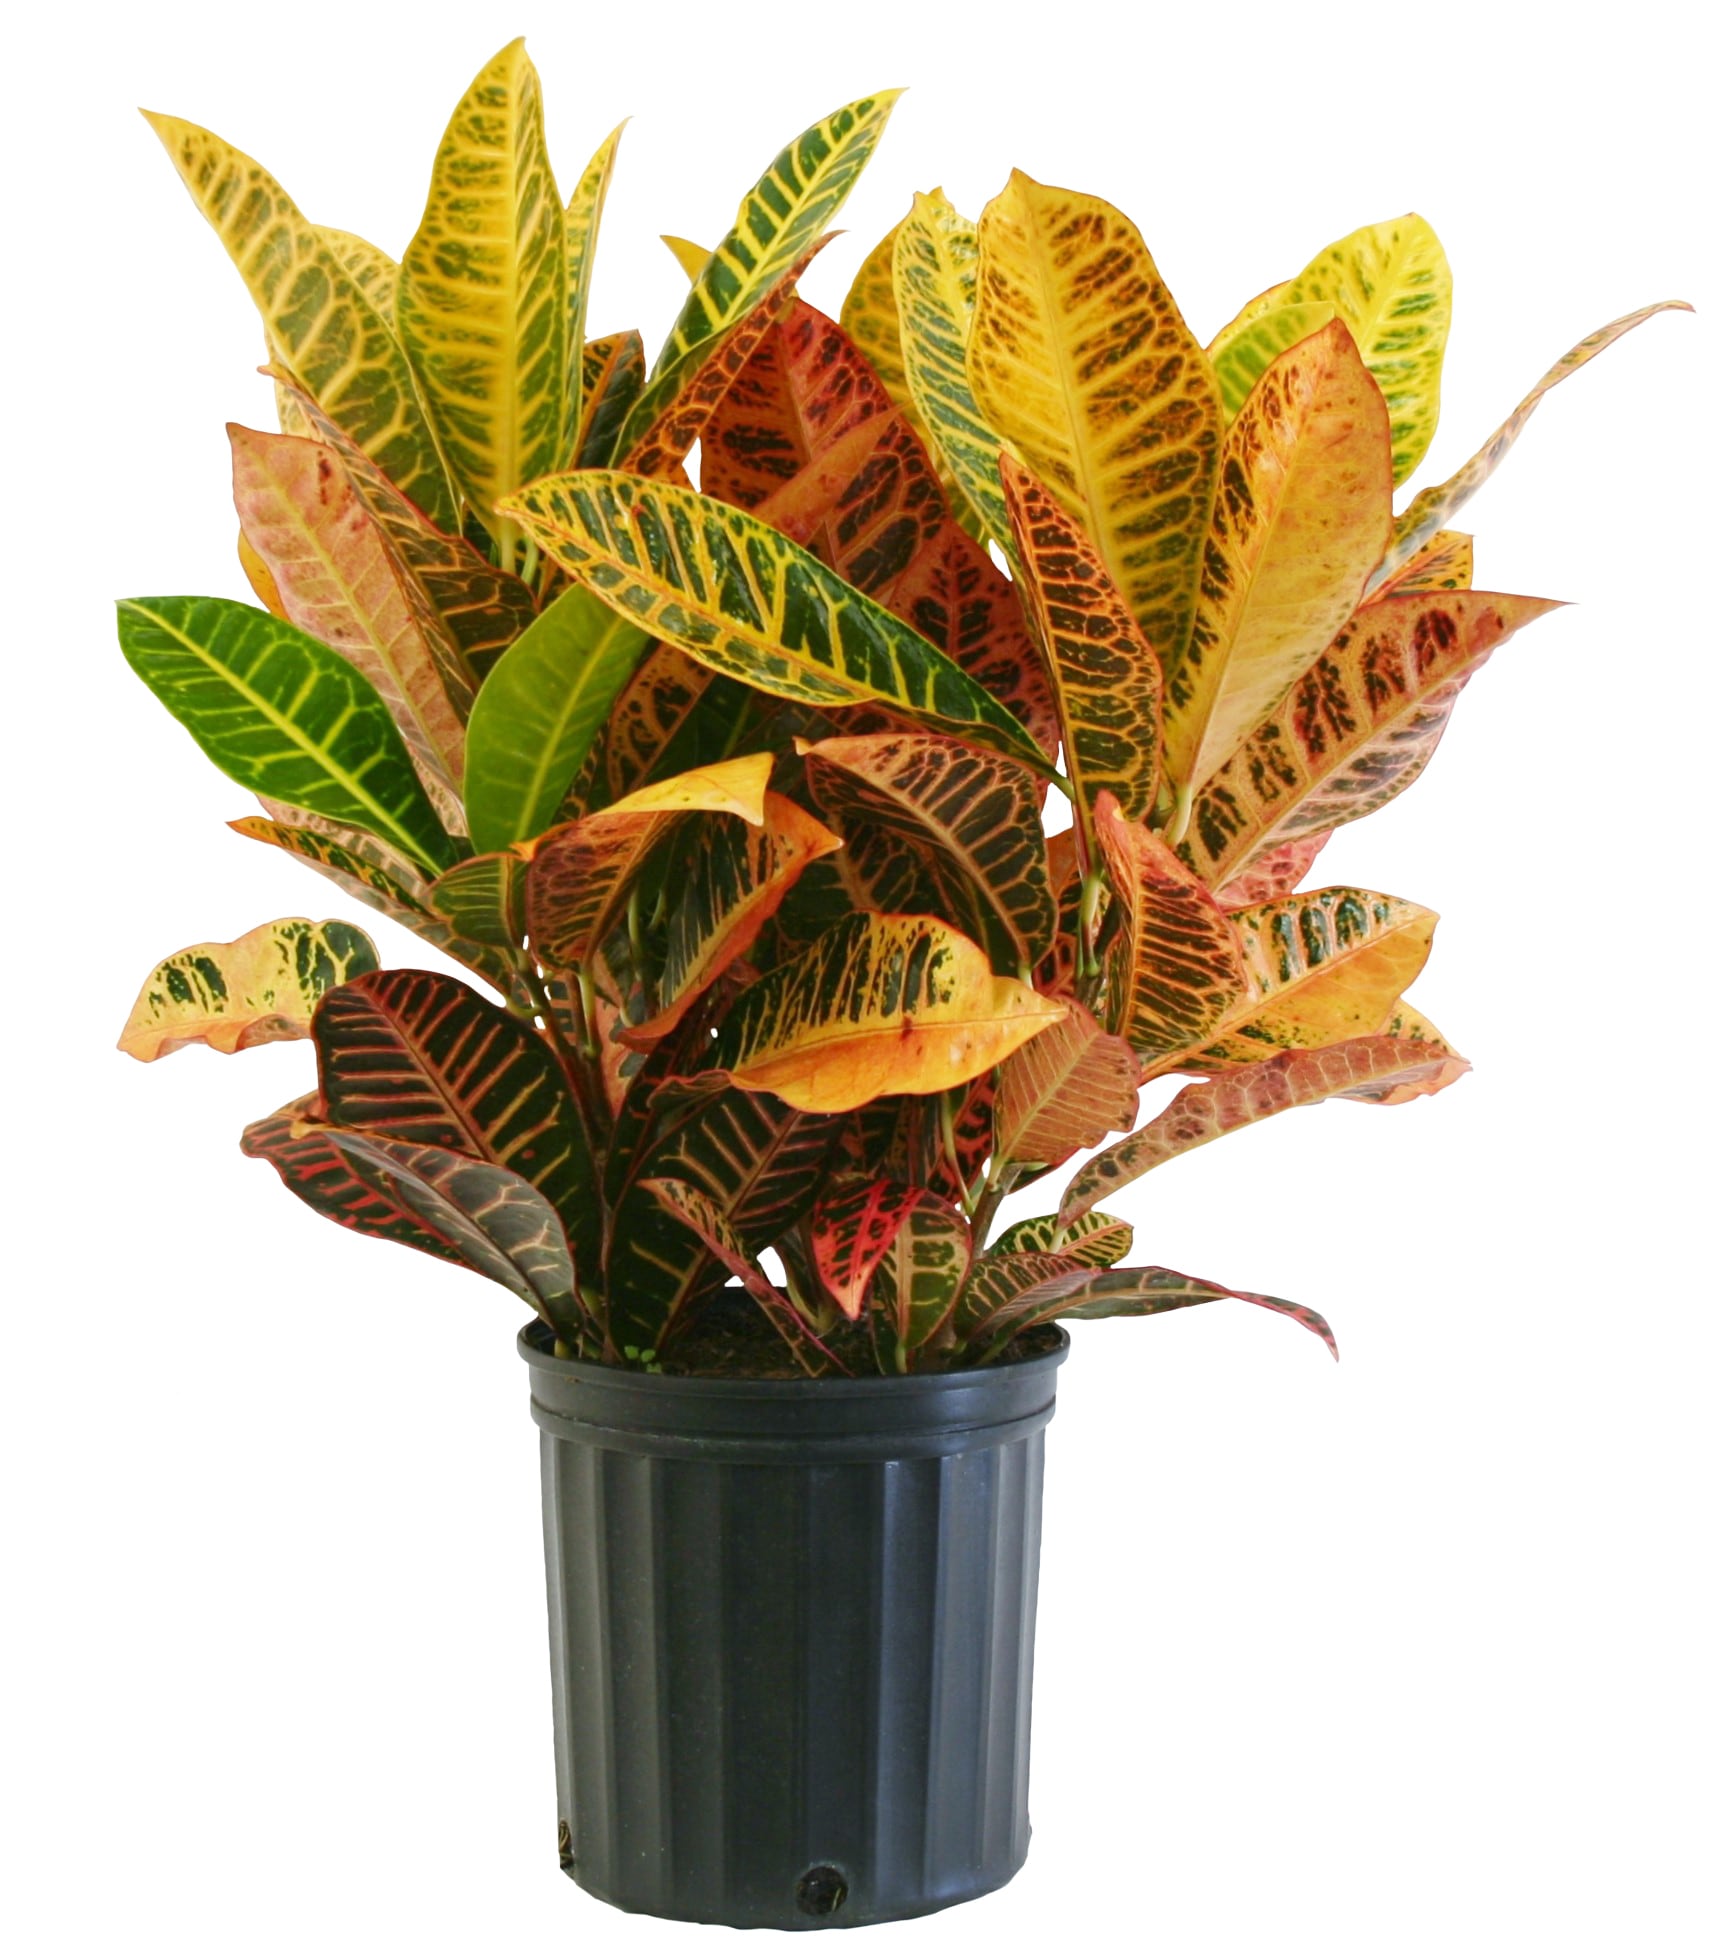 A Colorful Tropical That is Ideal for Bright Sun Location Indoors or in a Full Sun Patio Container in The Summer. Petra Croton Tropical Plant in a 4 inch Pot